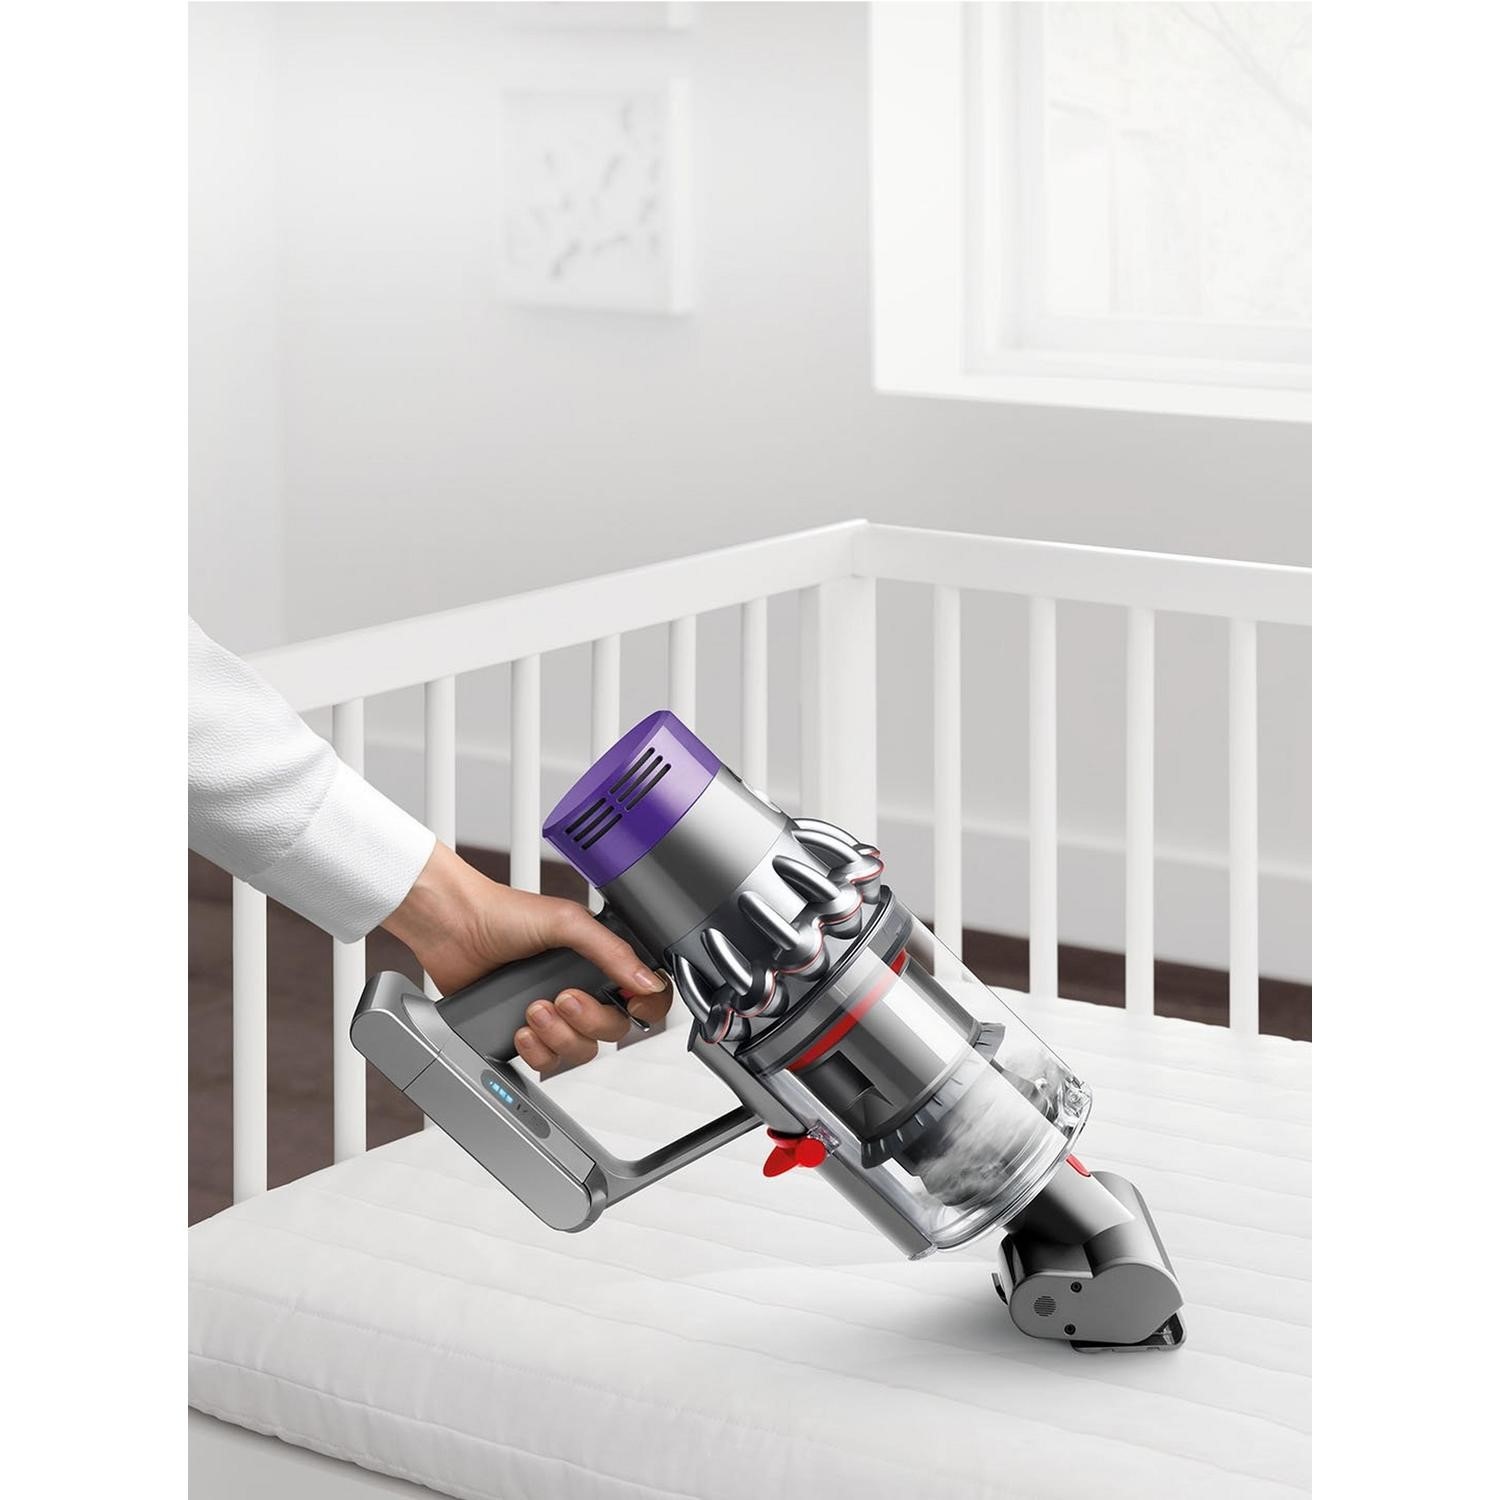 Dyson V10 Allergy Cordless Stick Vacuum Cleaner: 14 Cyclones, Fade-Free  Power, Whole Machine Filtration, Hygienic Bin Emptying